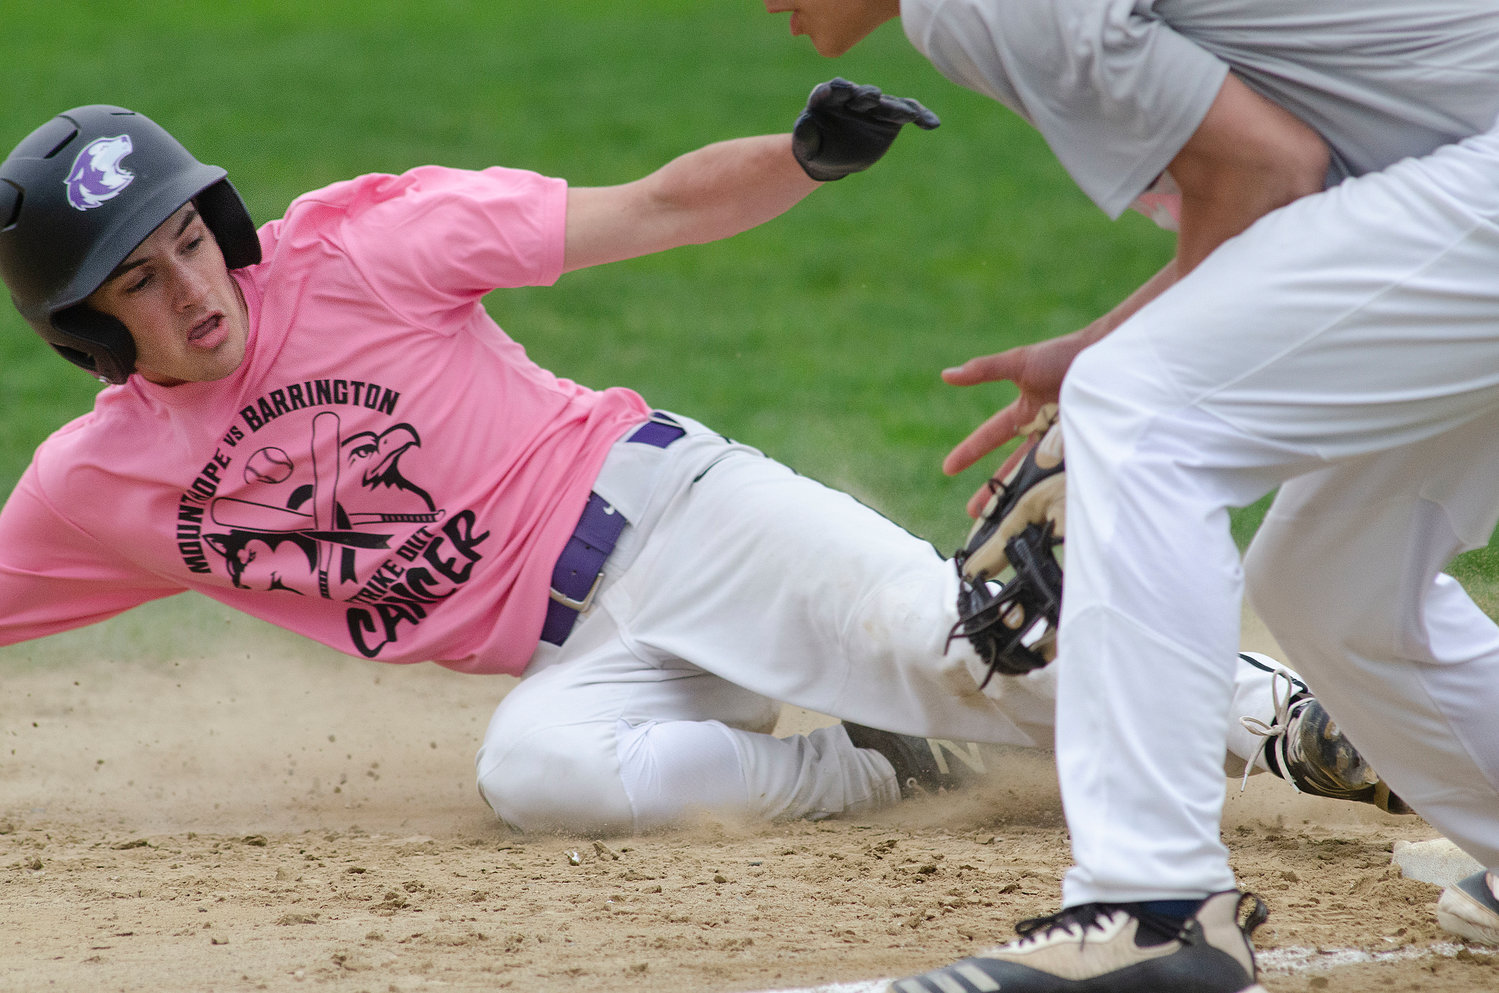 Dayton Van Amberg slides safely into third base after a teammate's hit to centerfield.